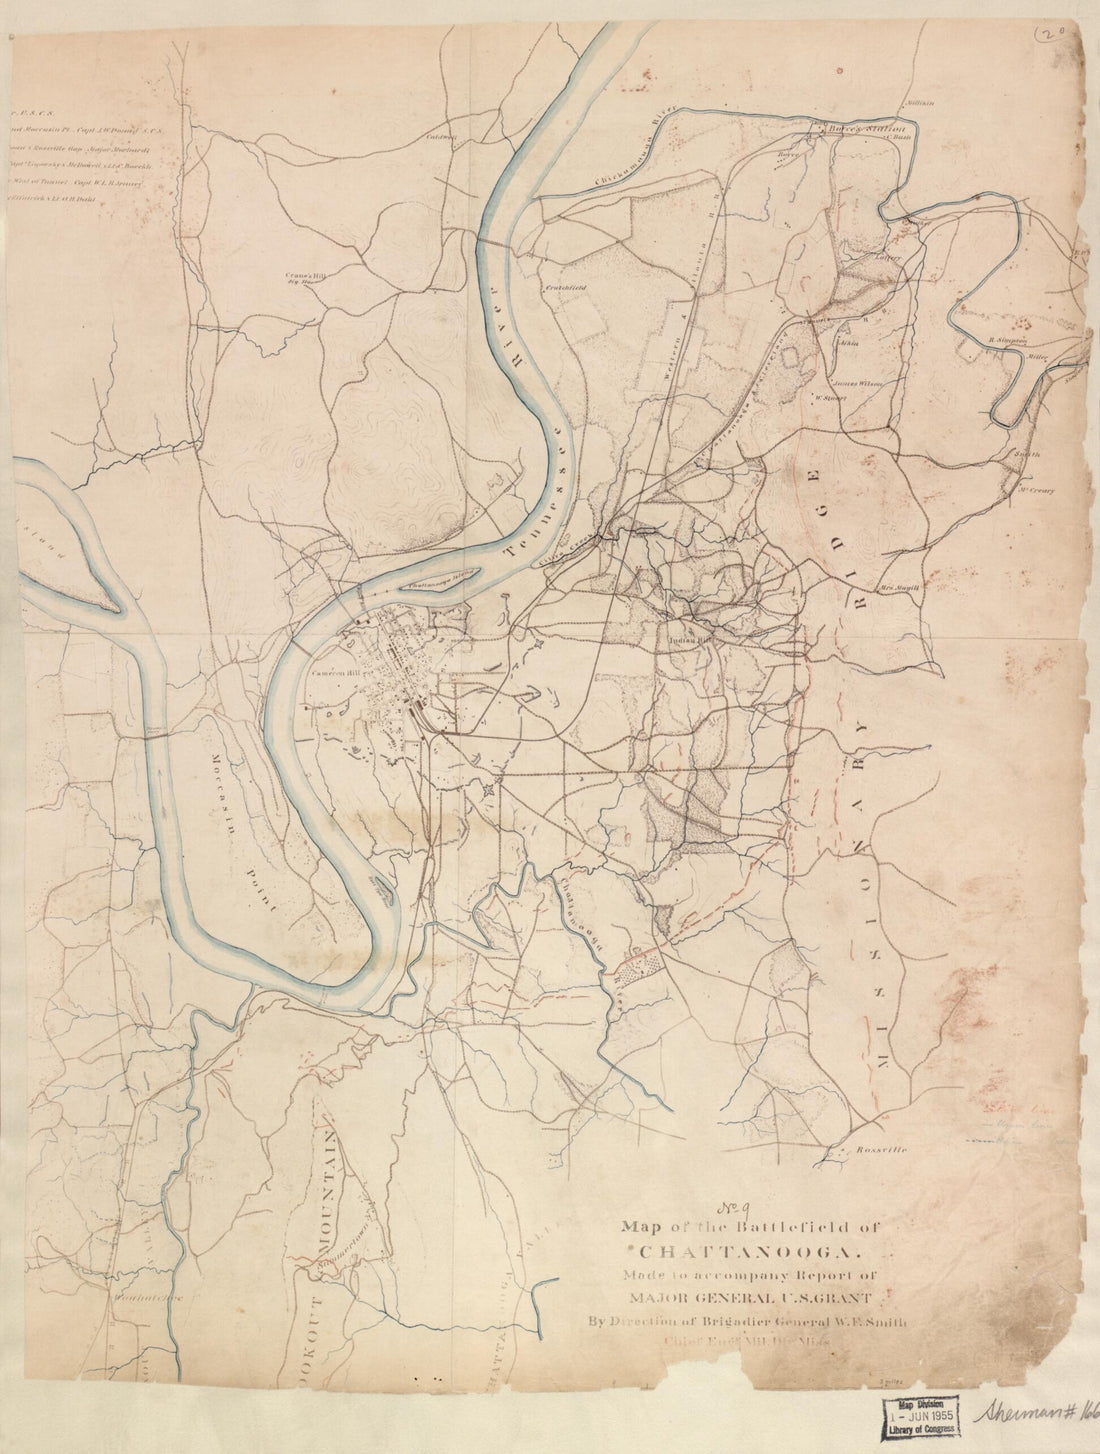 This old map of Map of the Battlefield of Chattanooga from 1864 was created by William F. Smith in 1864